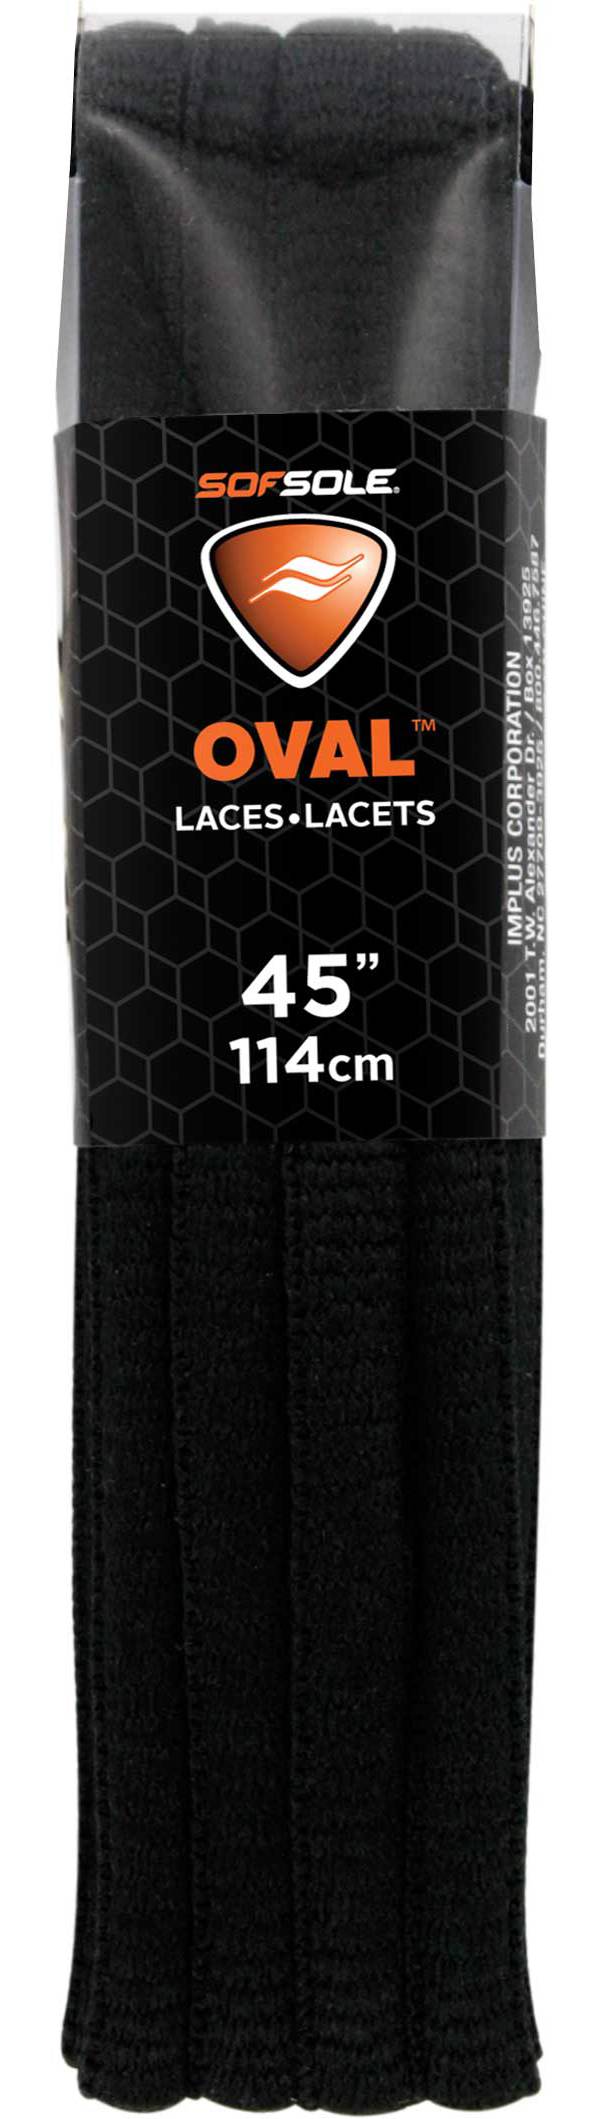 SofSole 45'' Oval Shoe Laces product image